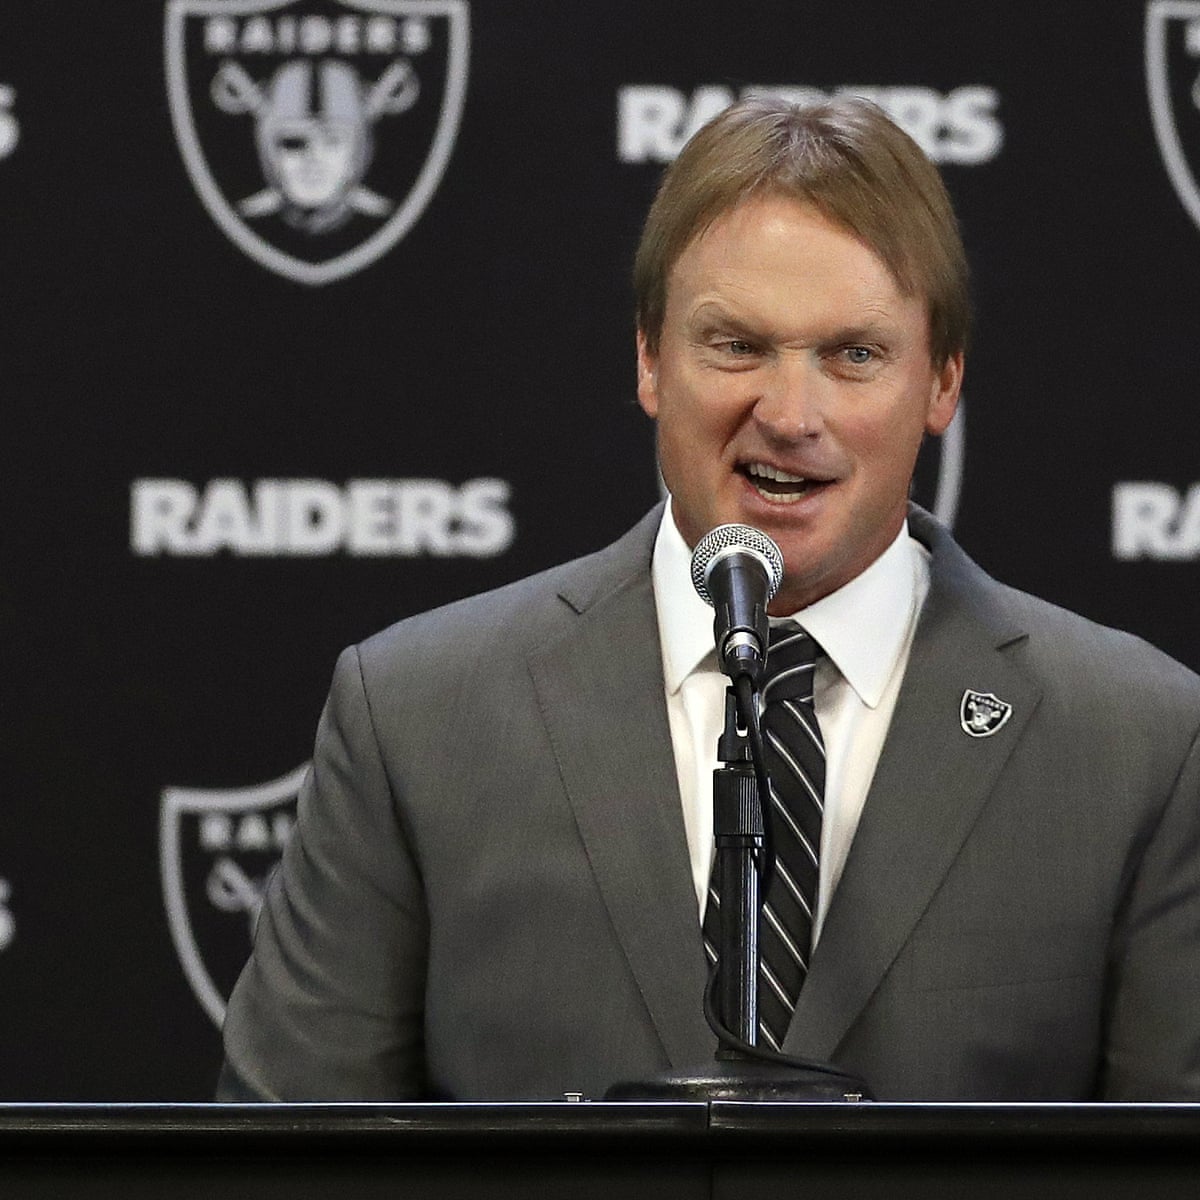 Is the Raiders' move for Jon Gruden just an expensive grab at the past? |  Oakland Raiders | The Guardian